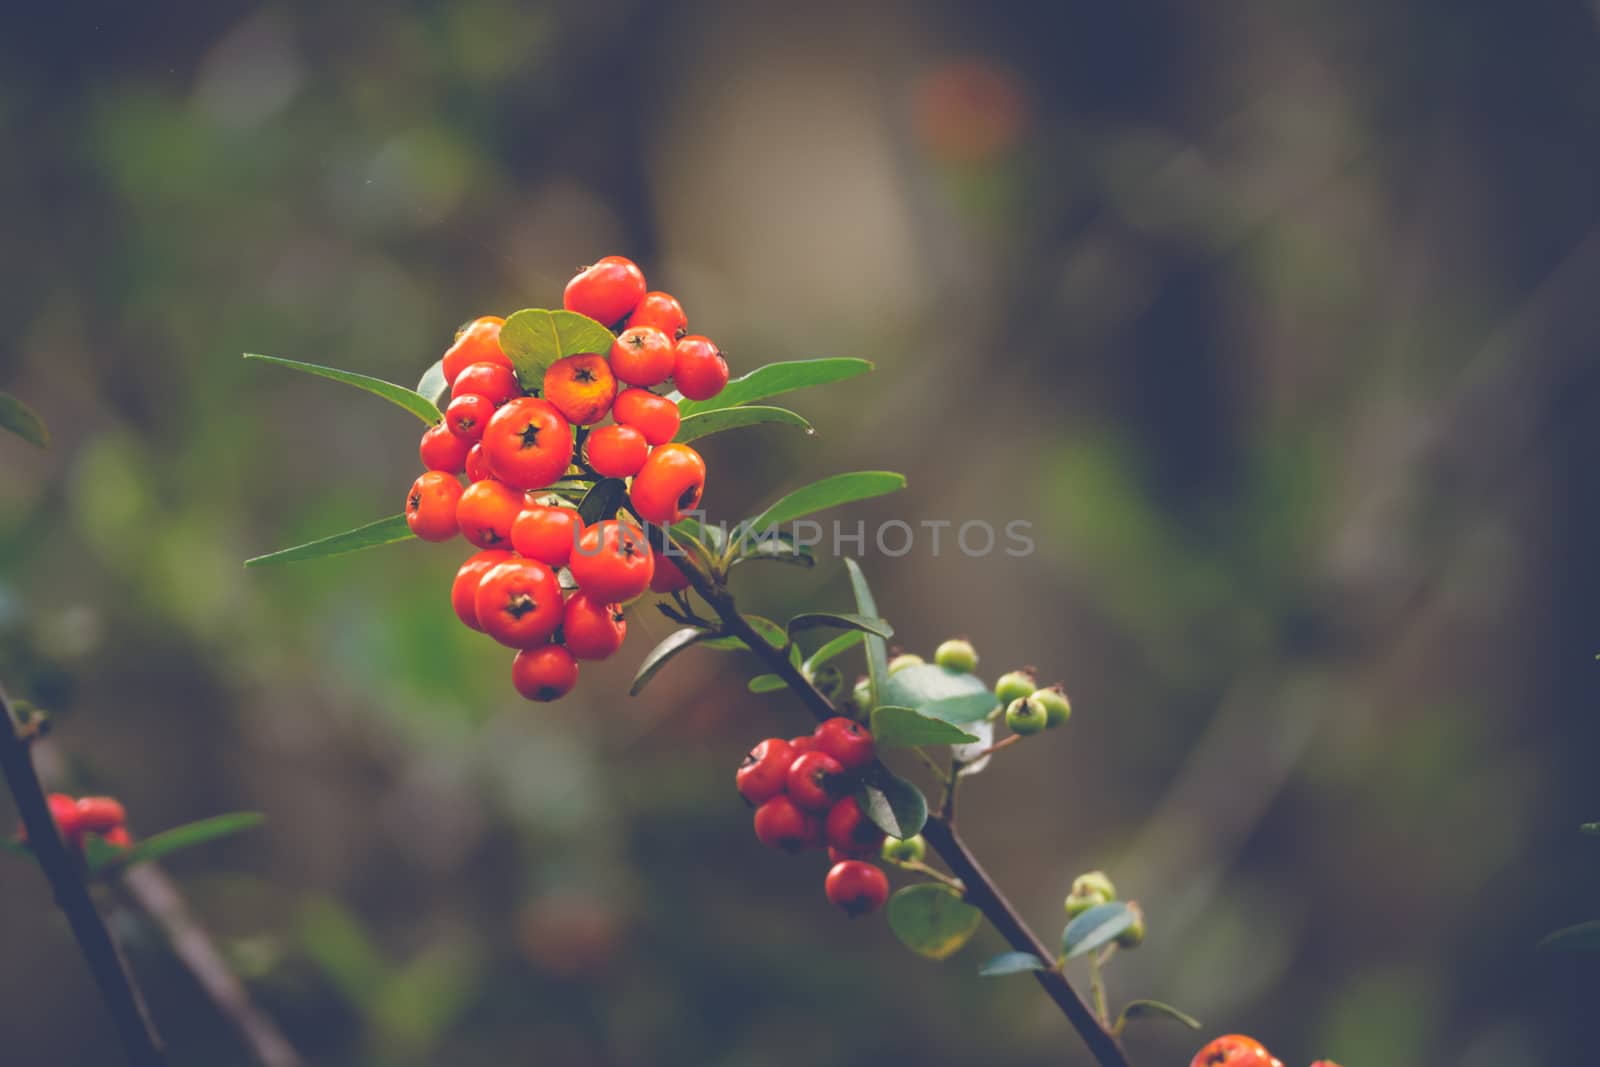 Coffee beans ripening on tree in North of thailand, nature background